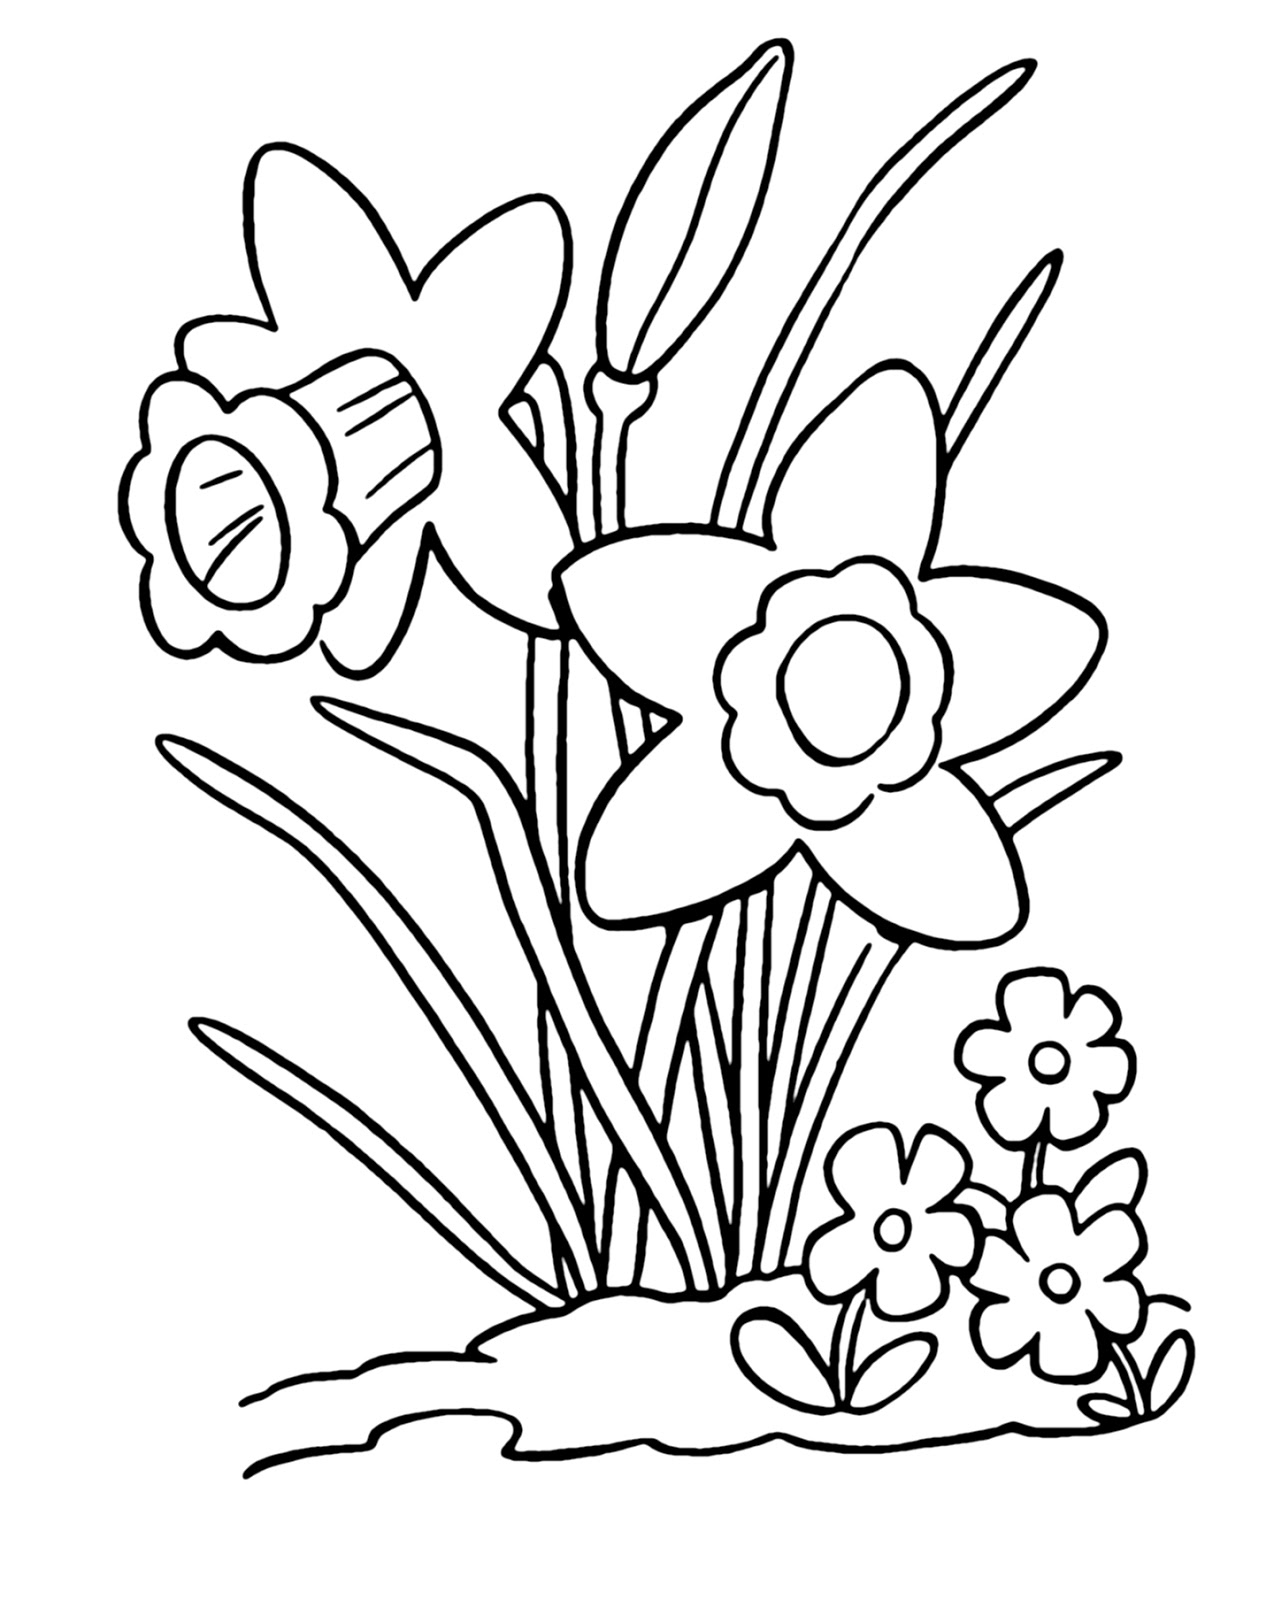 Daffodils Coloring Pages